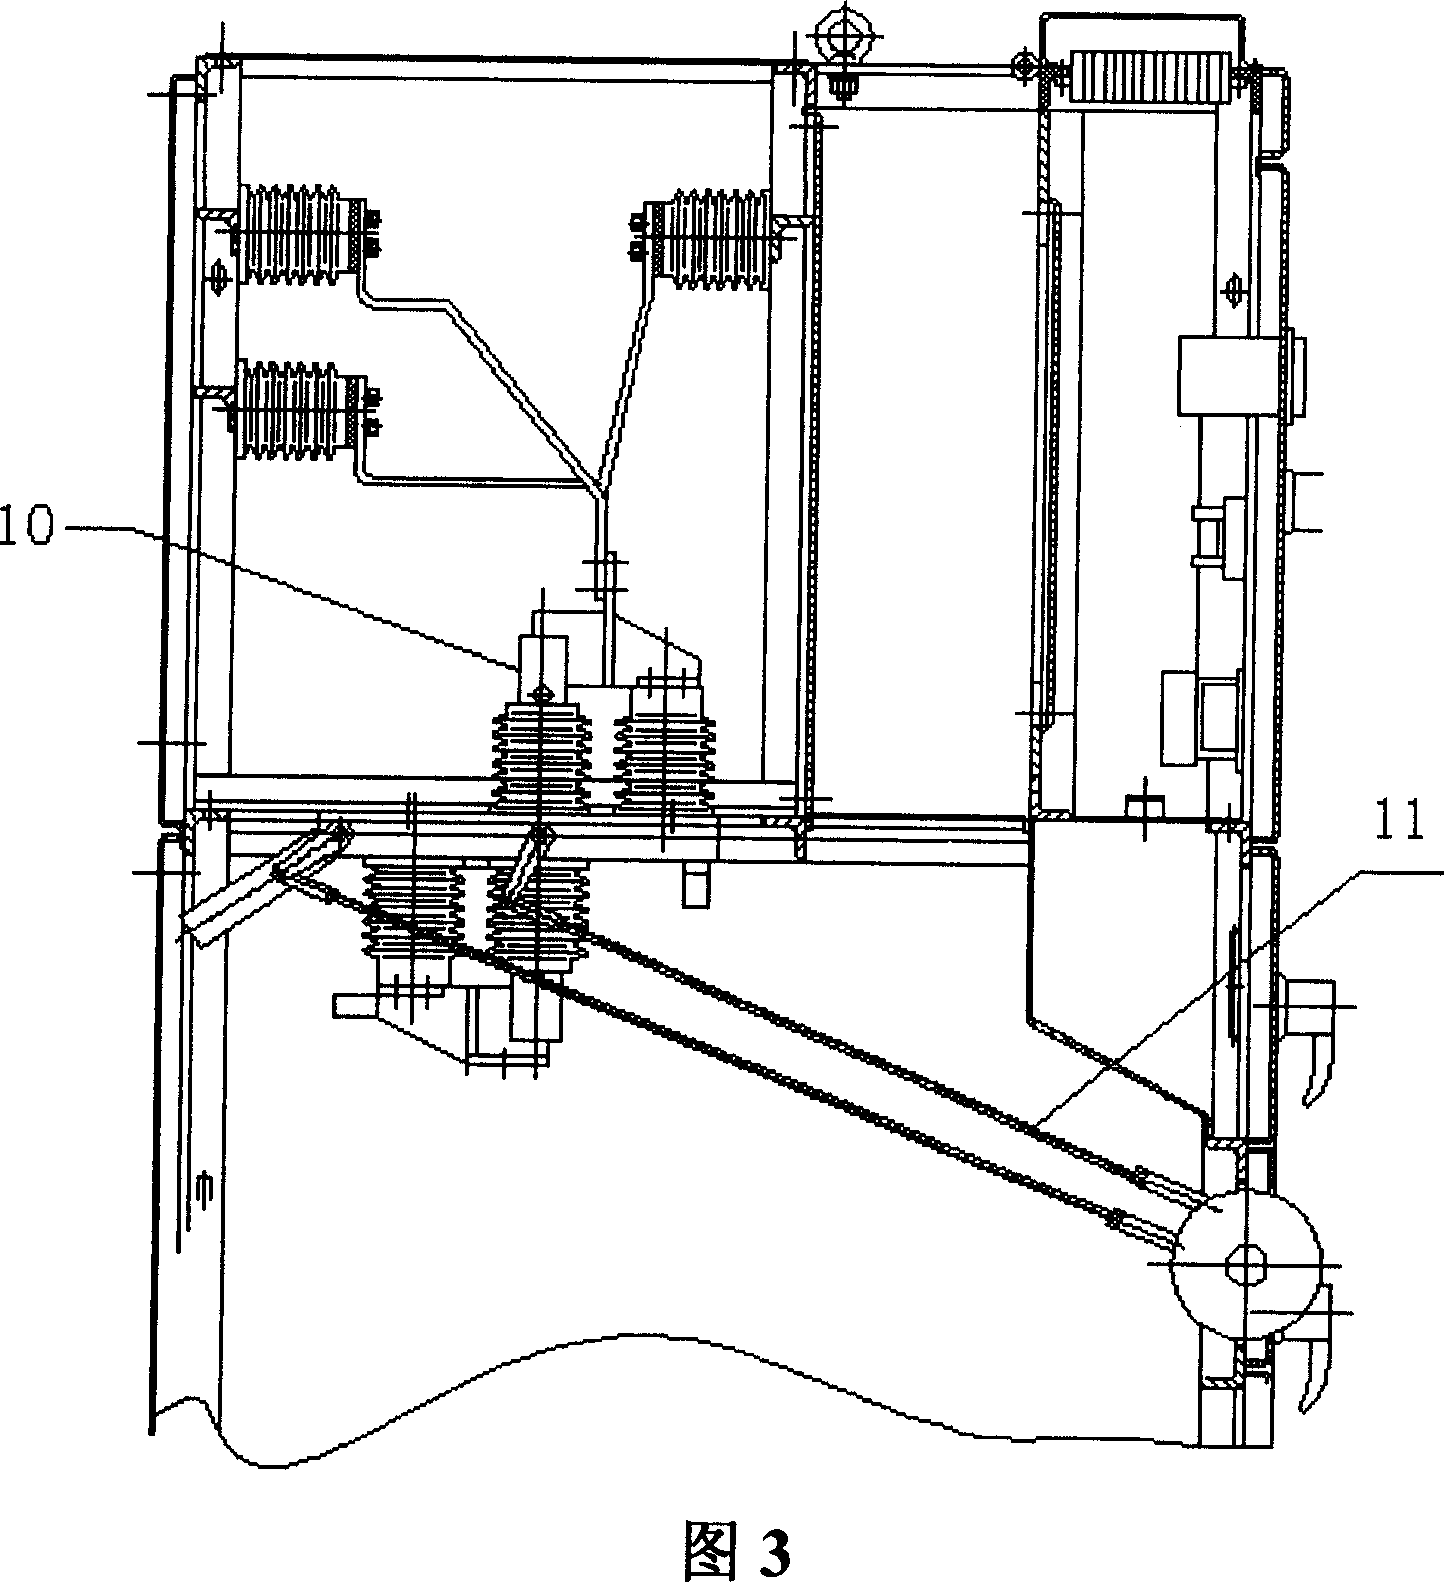 Mounting structure for isolating switch in medium voltage switch cabinet